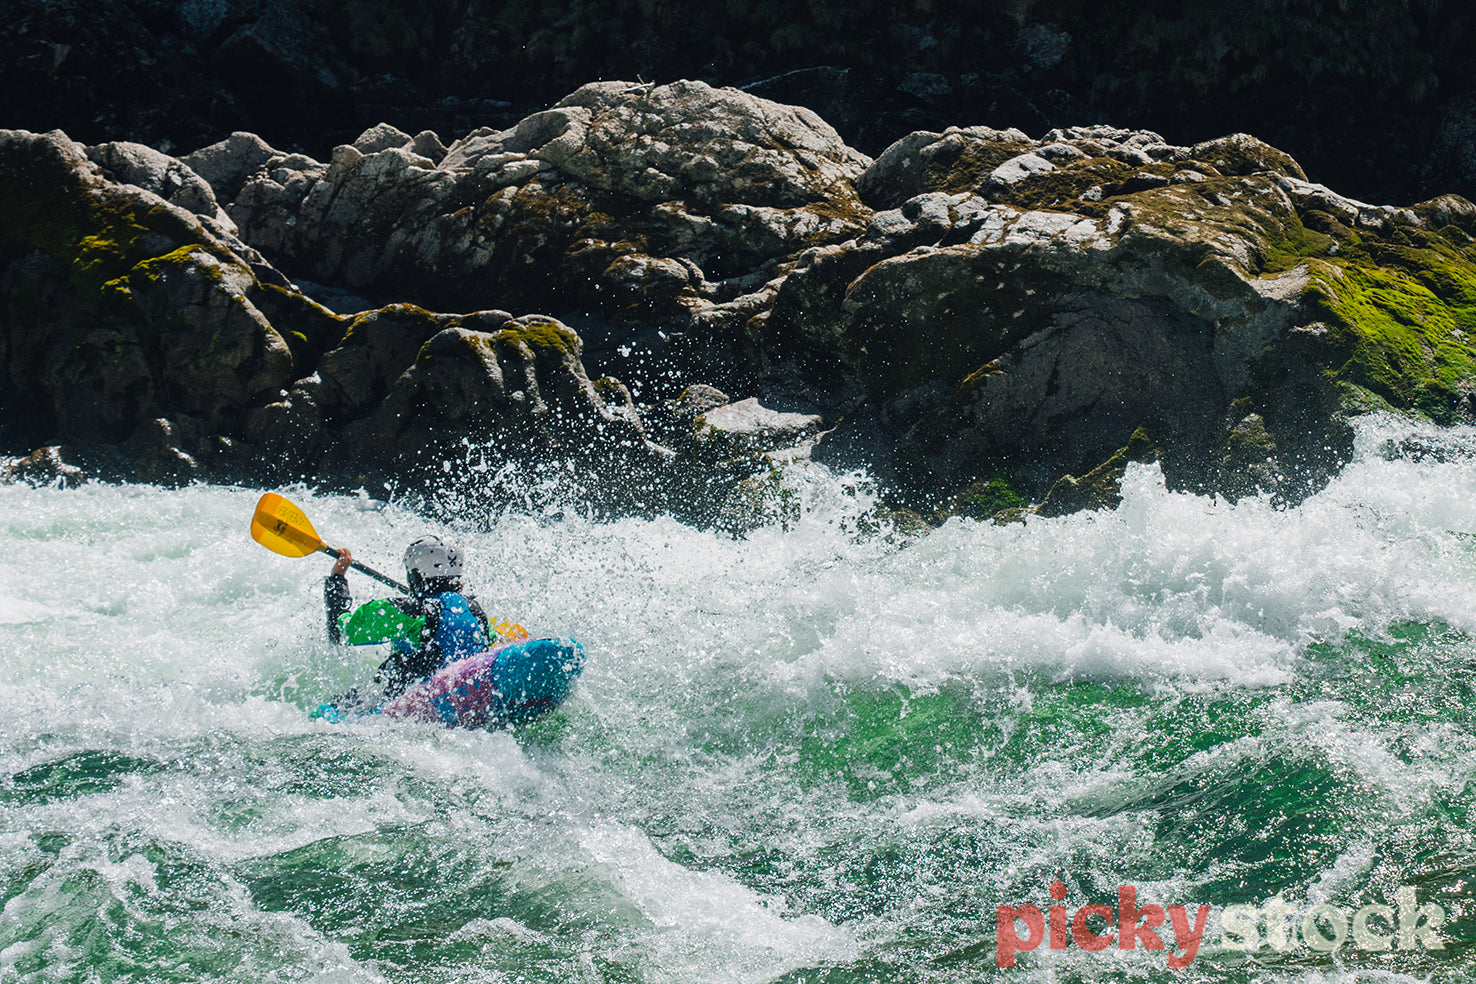 Whitewater kayaker in a rapid